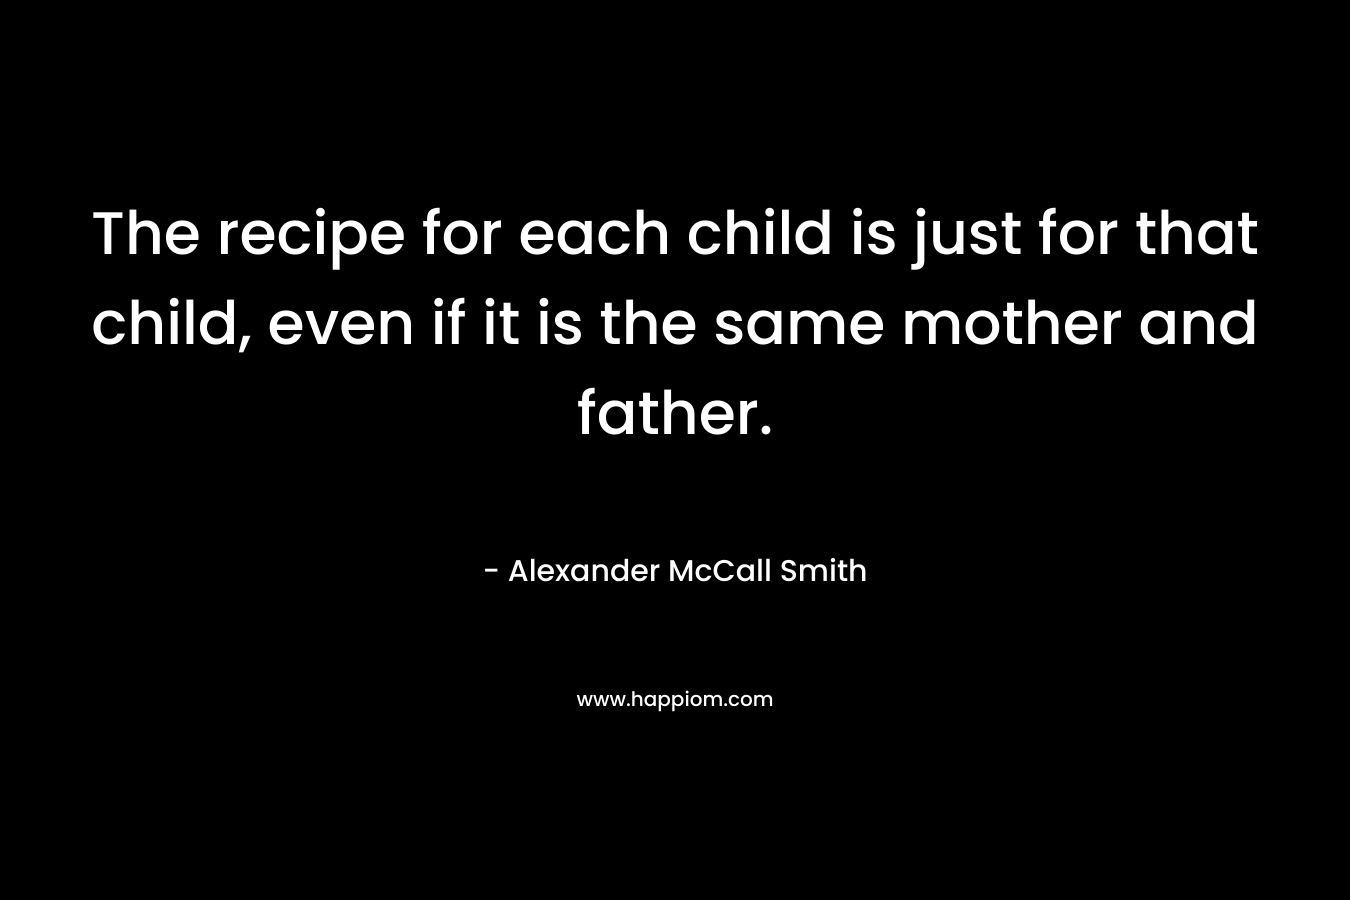 The recipe for each child is just for that child, even if it is the same mother and father.